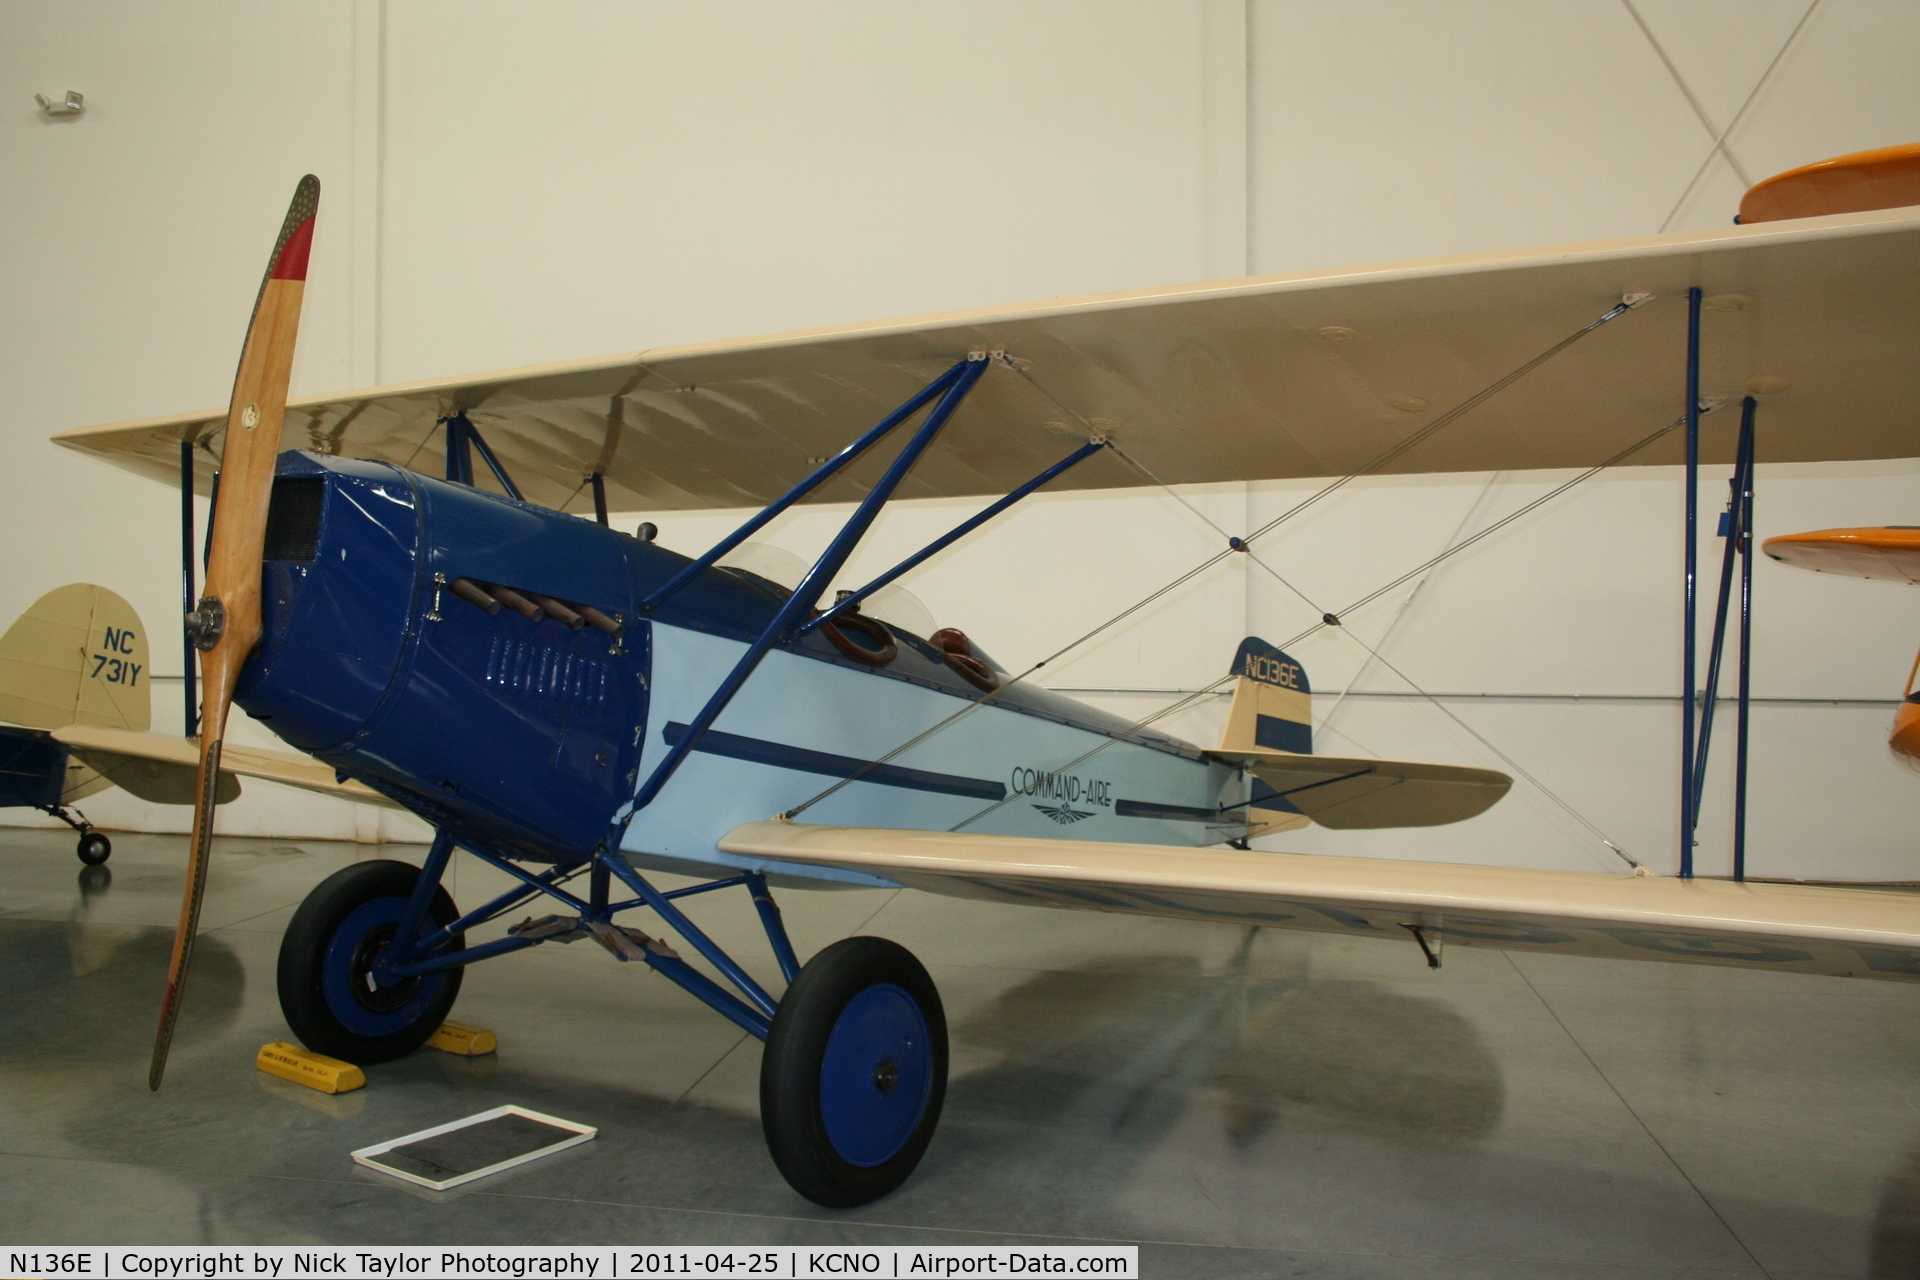 N136E, 1928 Command-aire 3C-3 C/N 532, On display at the Yanks air museum